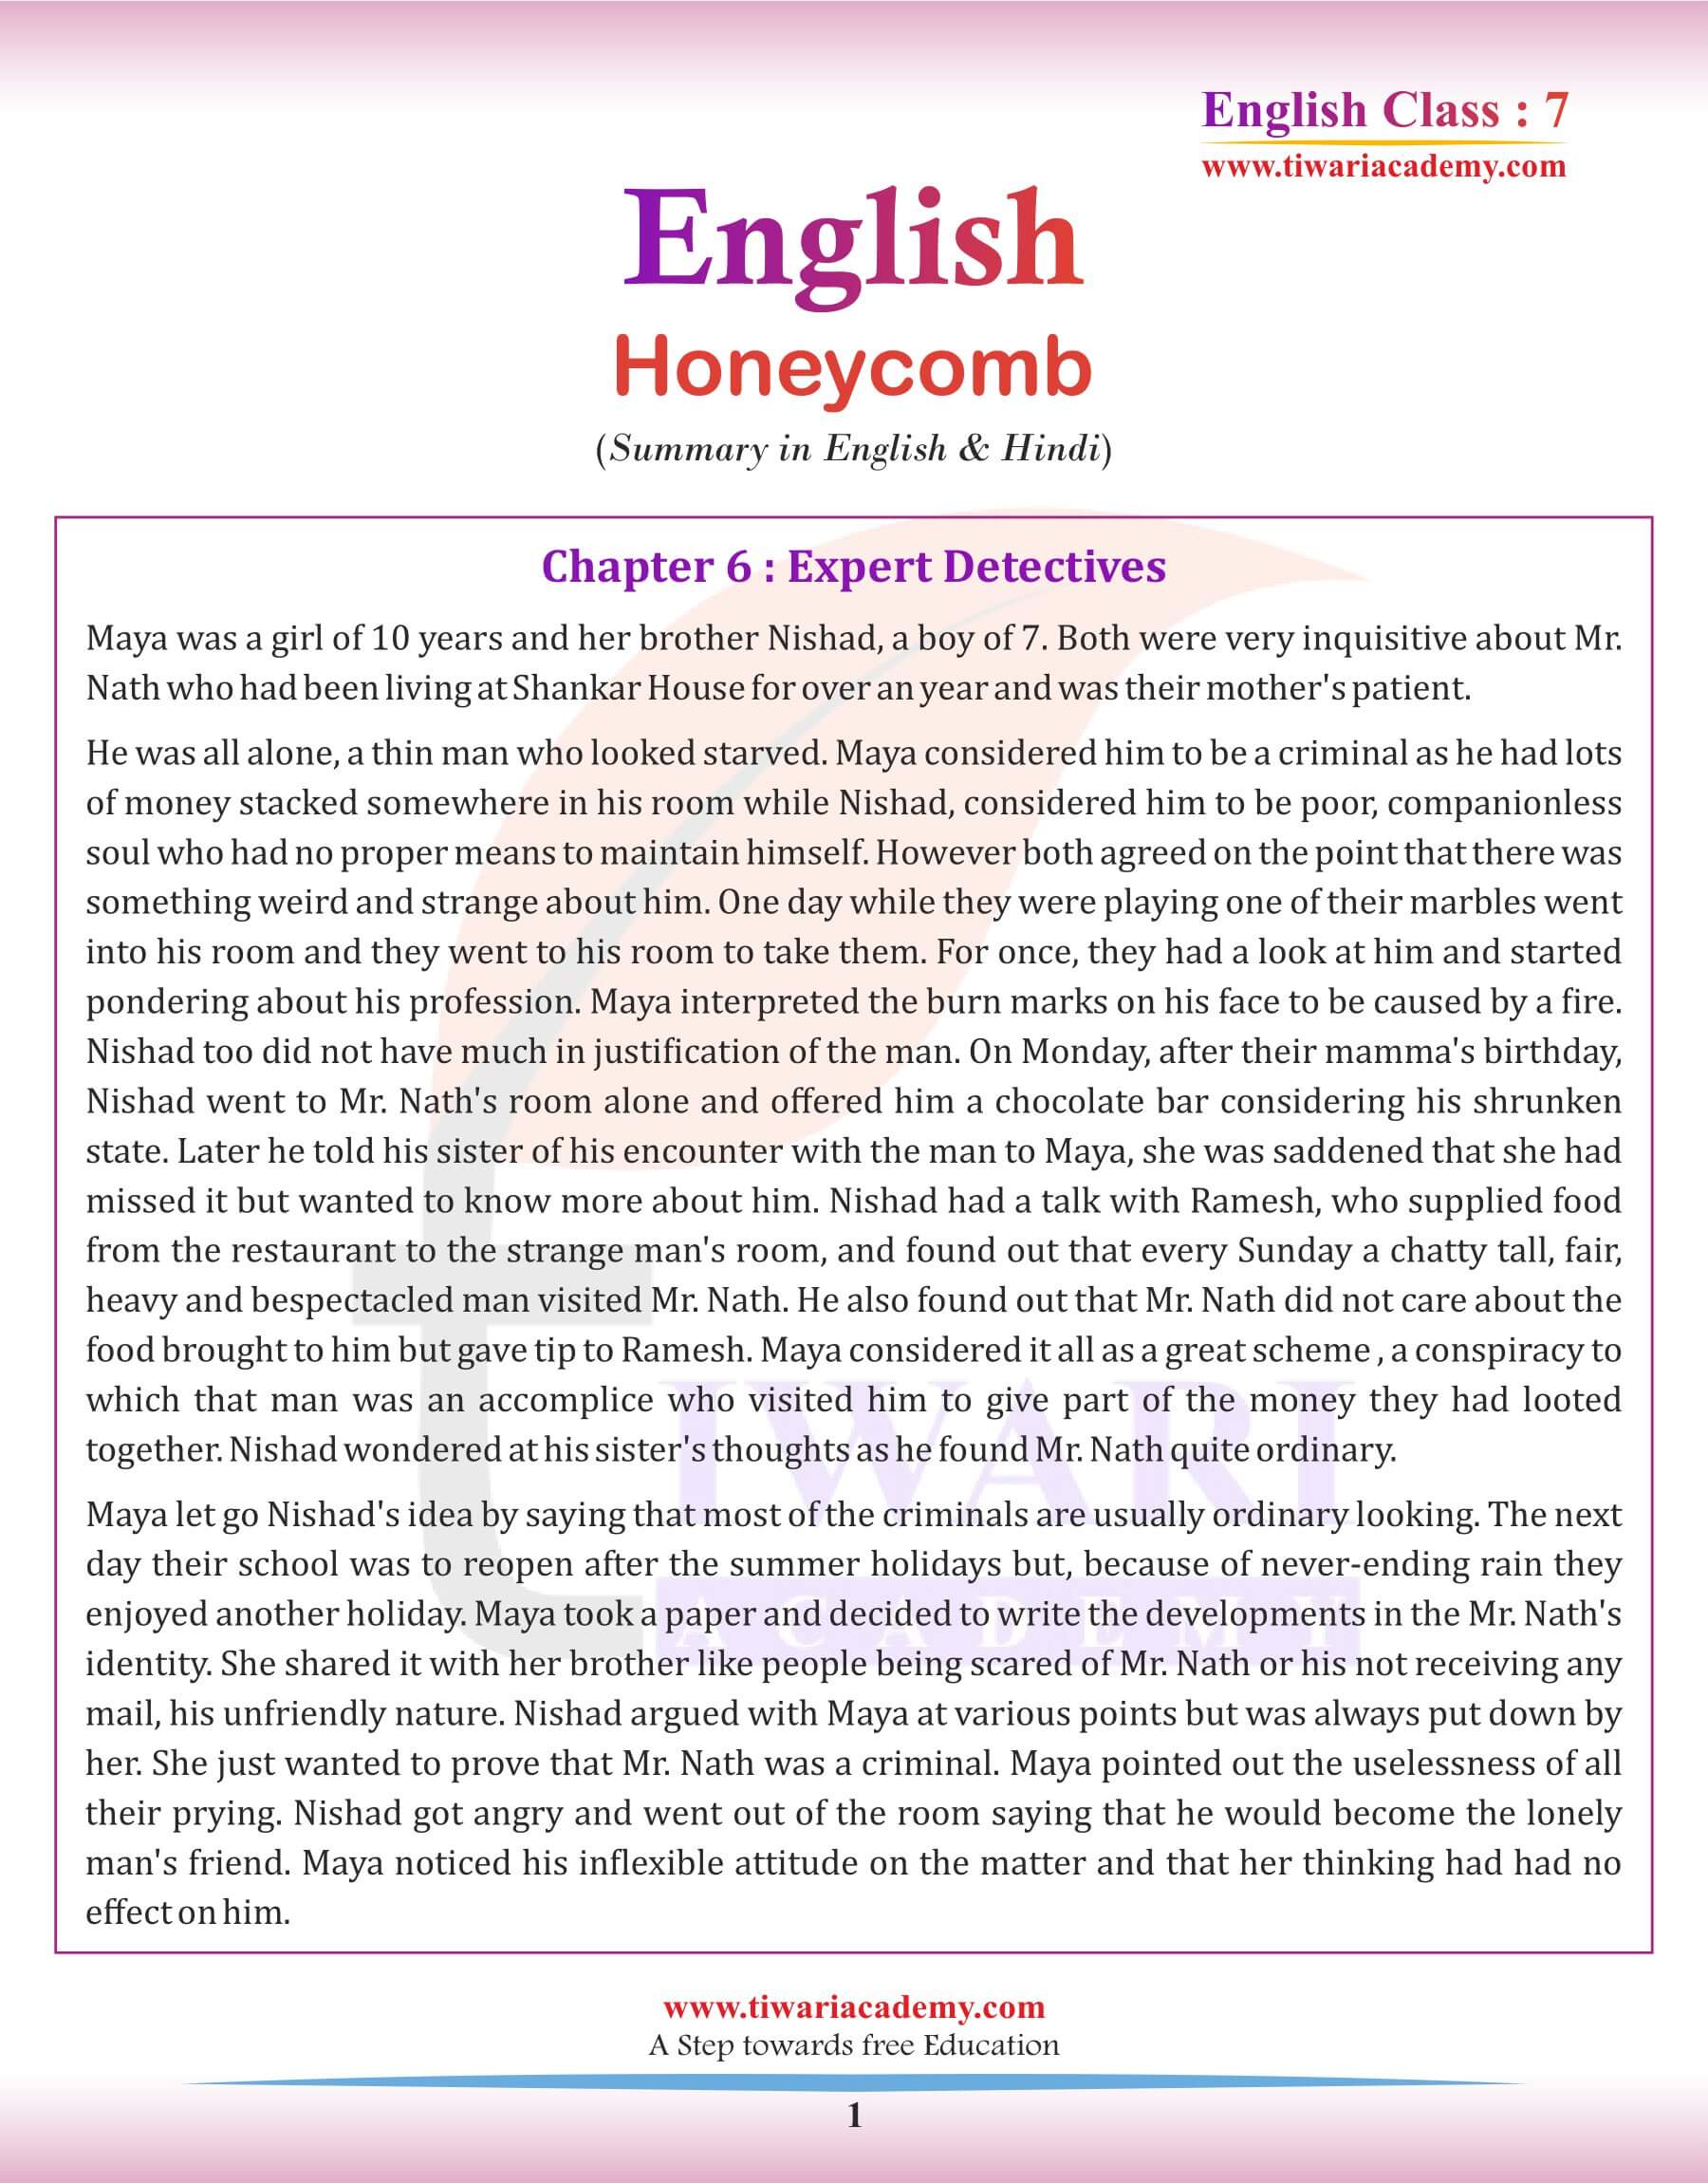 Class 7 English Chapter 6 Summary in English